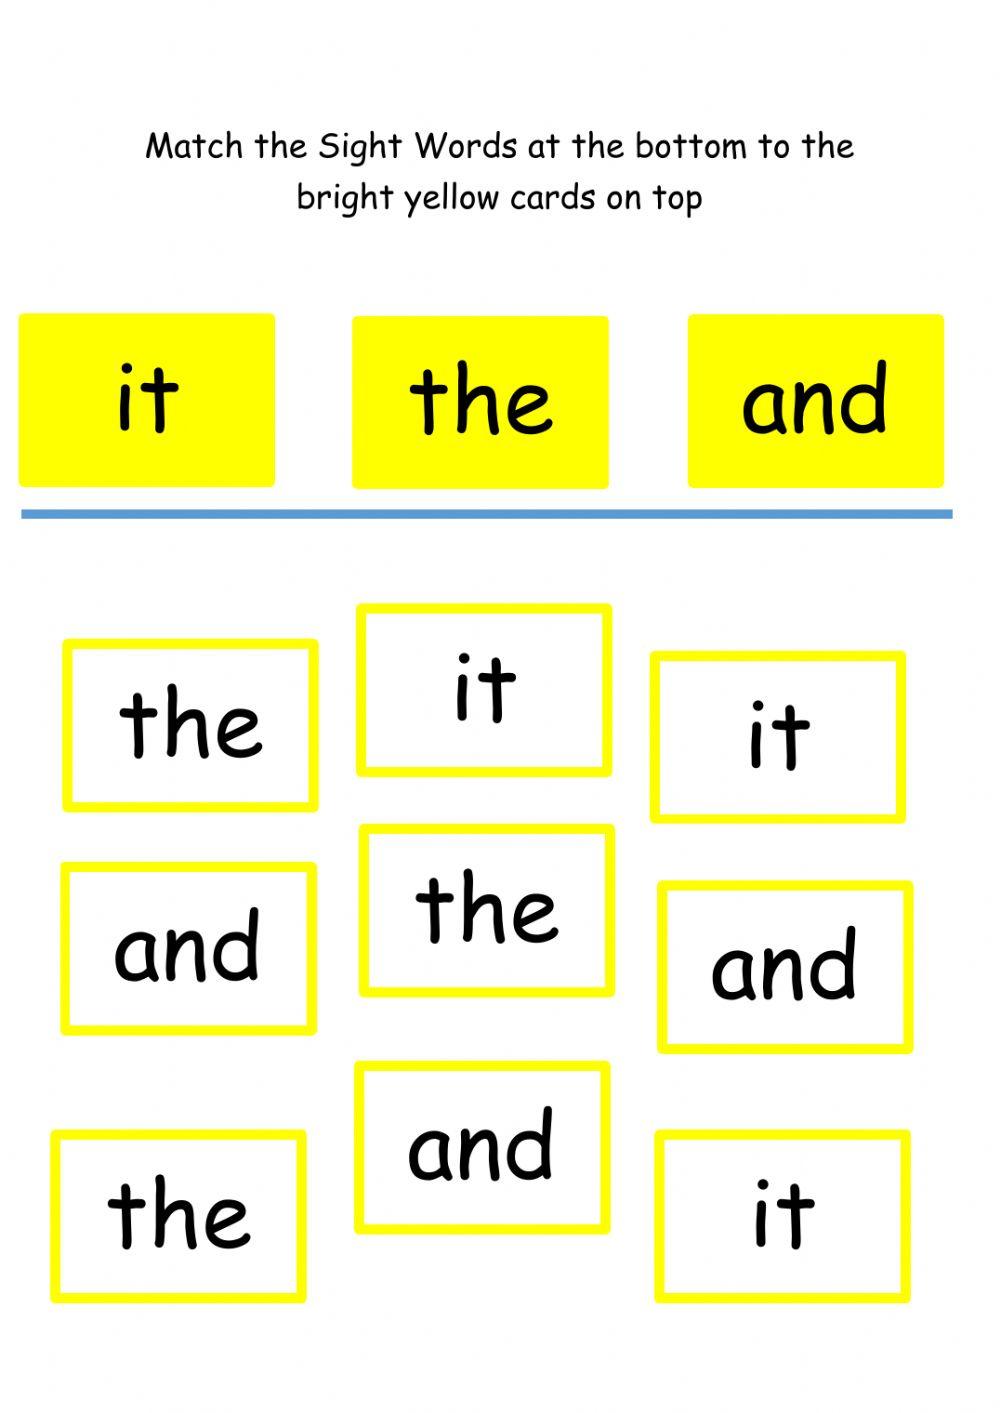 Match the sight words 1